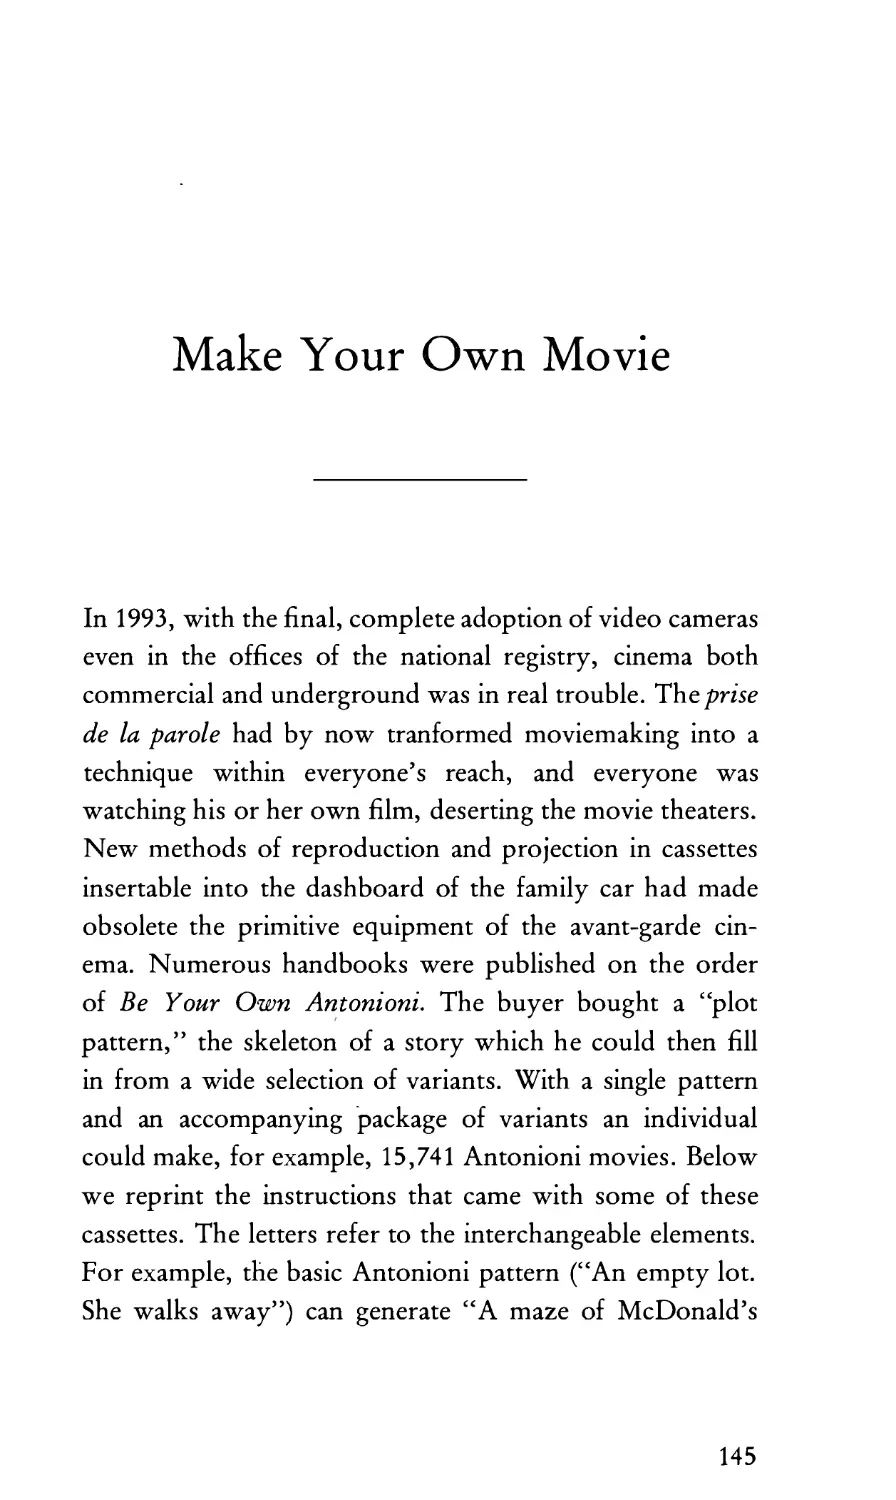 Make Your Own Movie